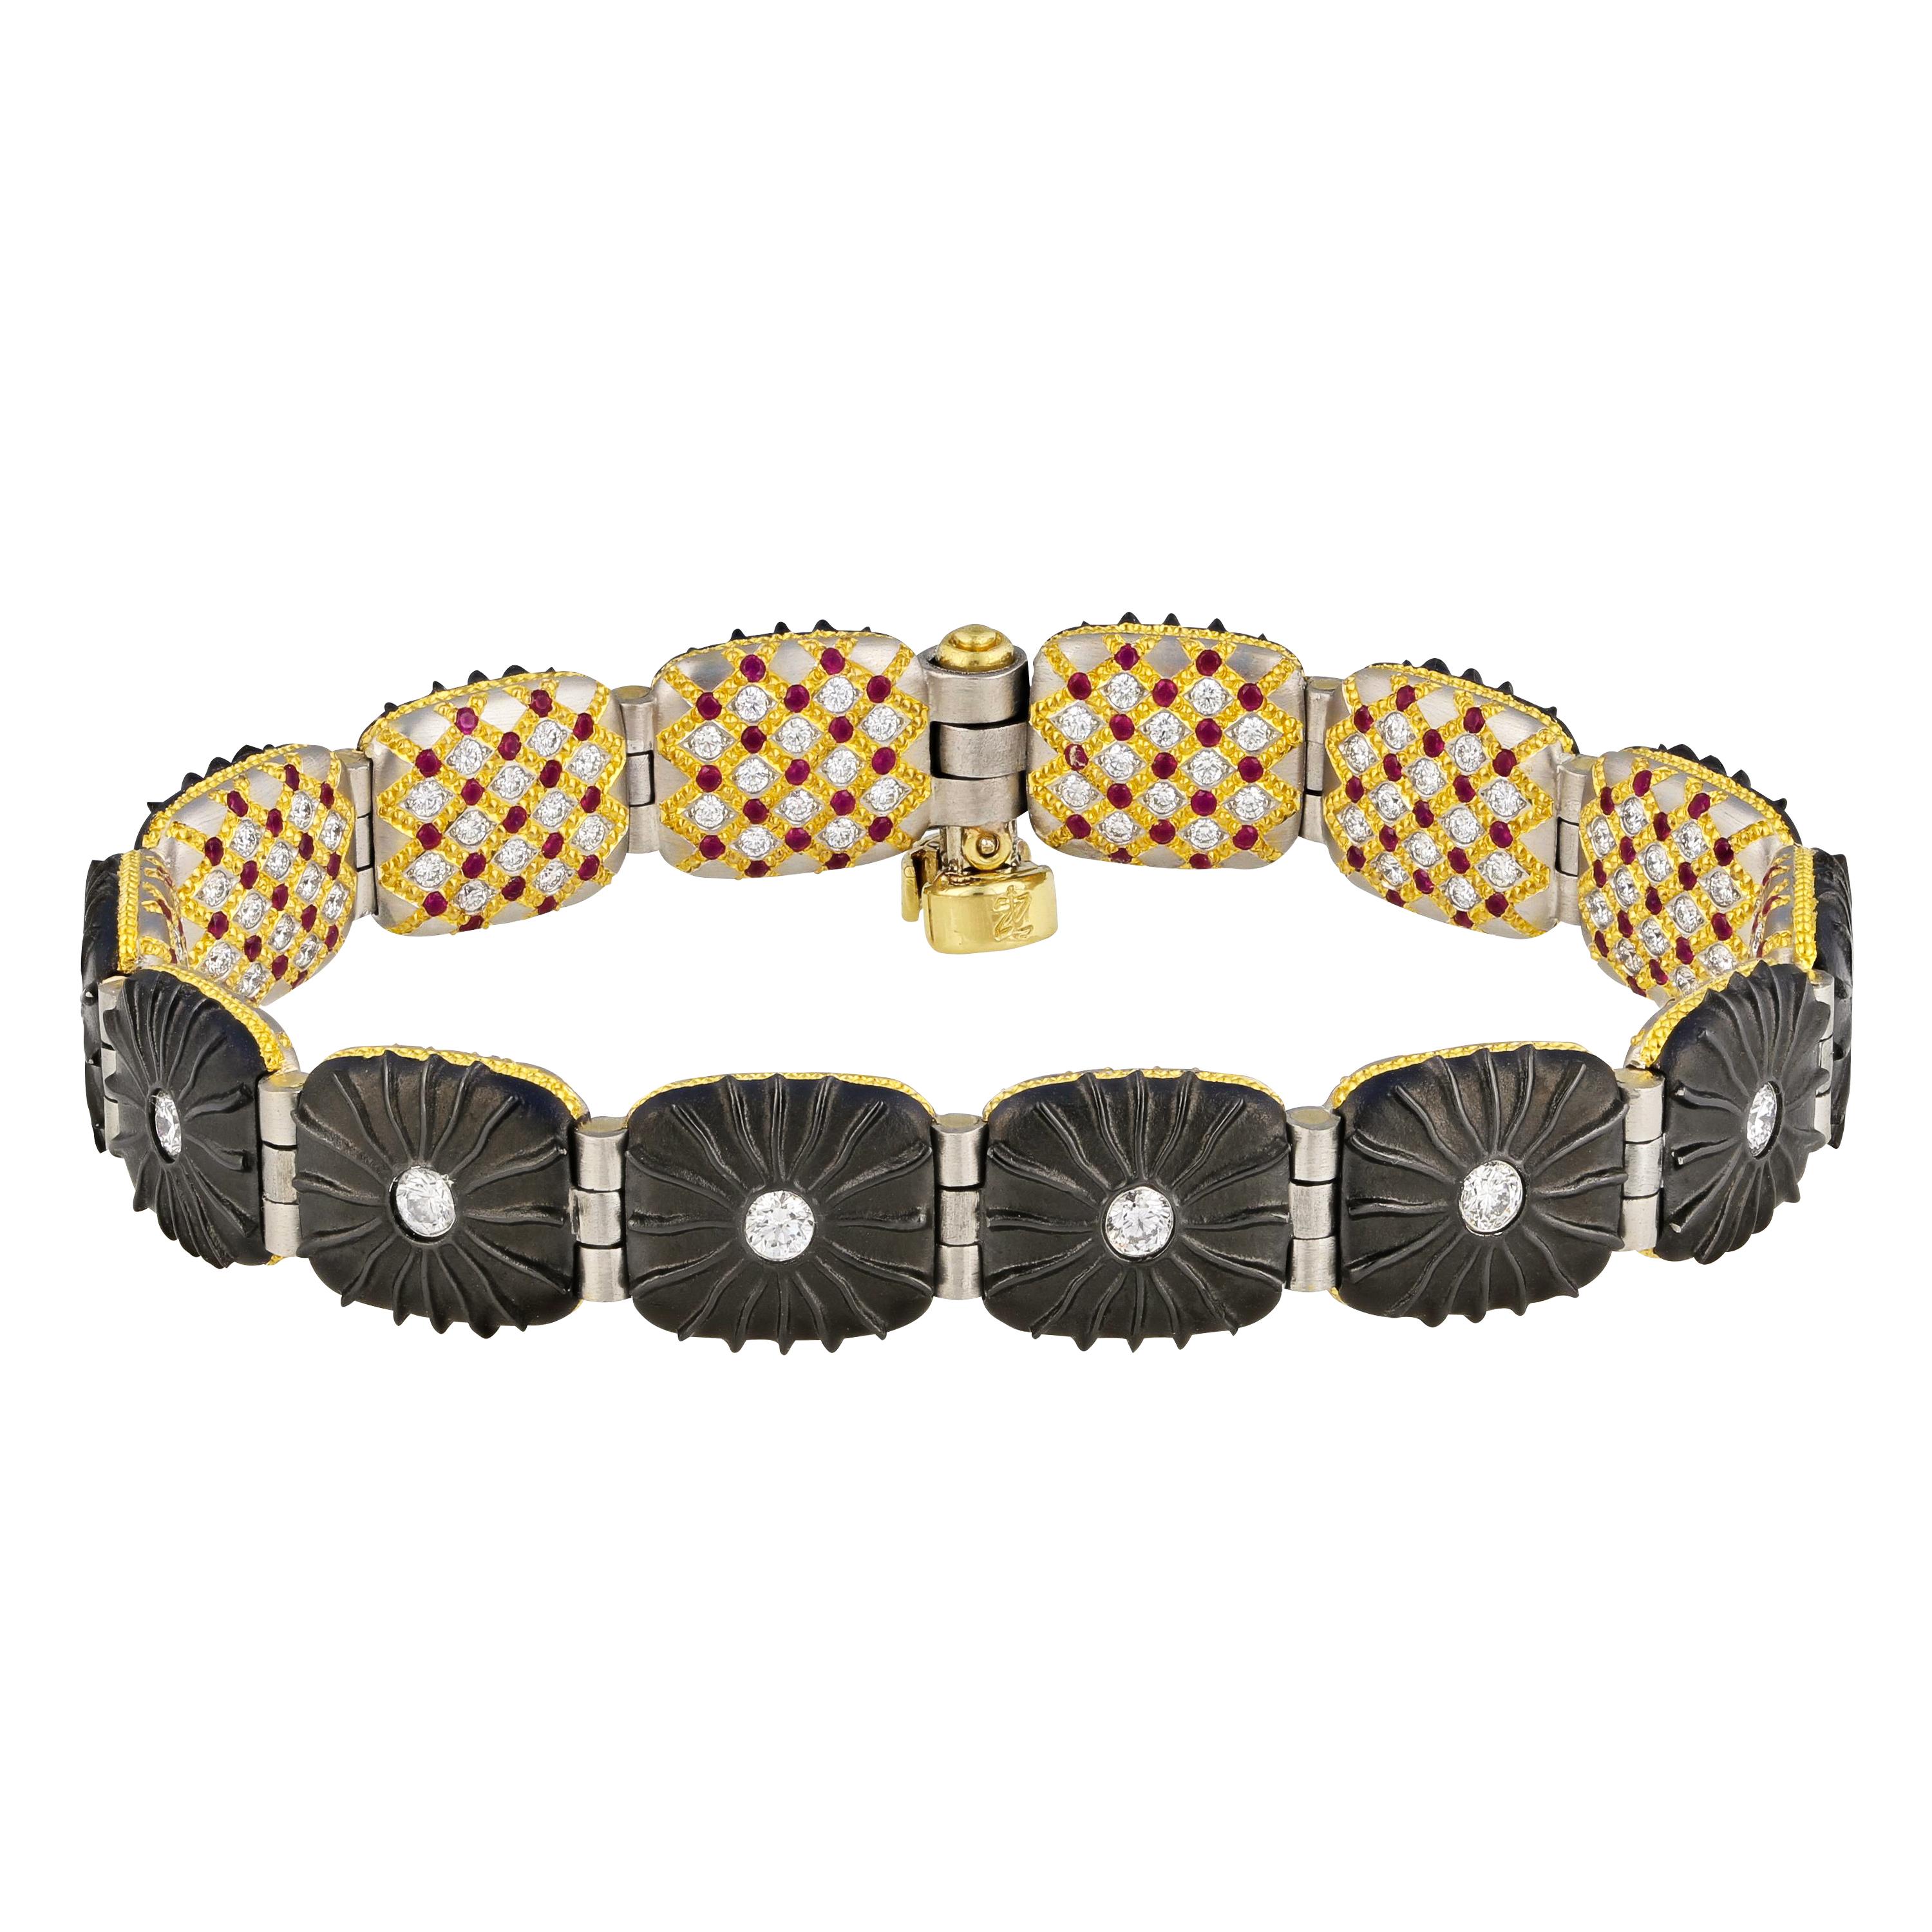 It doesn't get any better than this. A one of a kind reversible bracelet with a casual Knightsteel and Diamond side and a formal elegant Ruby & Diamond tapestry on the other, with a line of 24K Gold shaped inlay between. There are fourteen .05 ct.